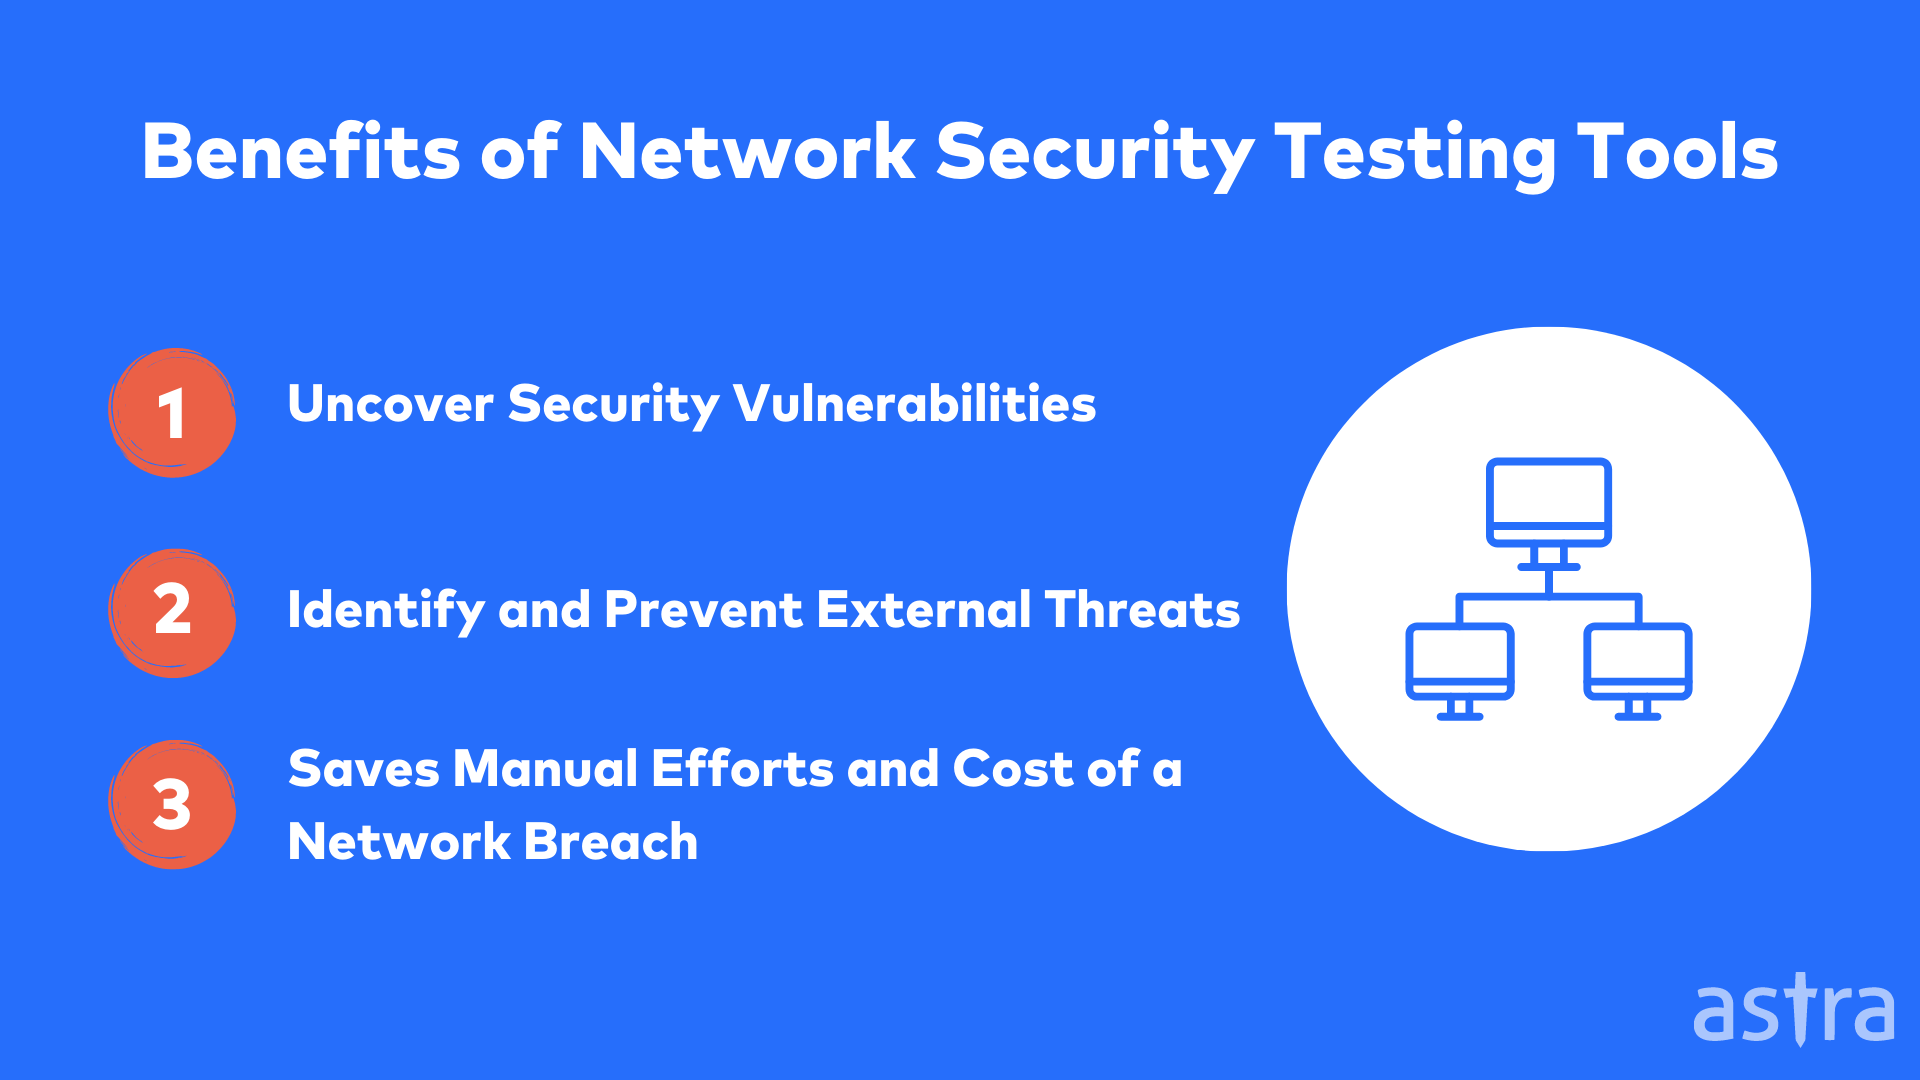 Benefits of Network Security Testing Tools